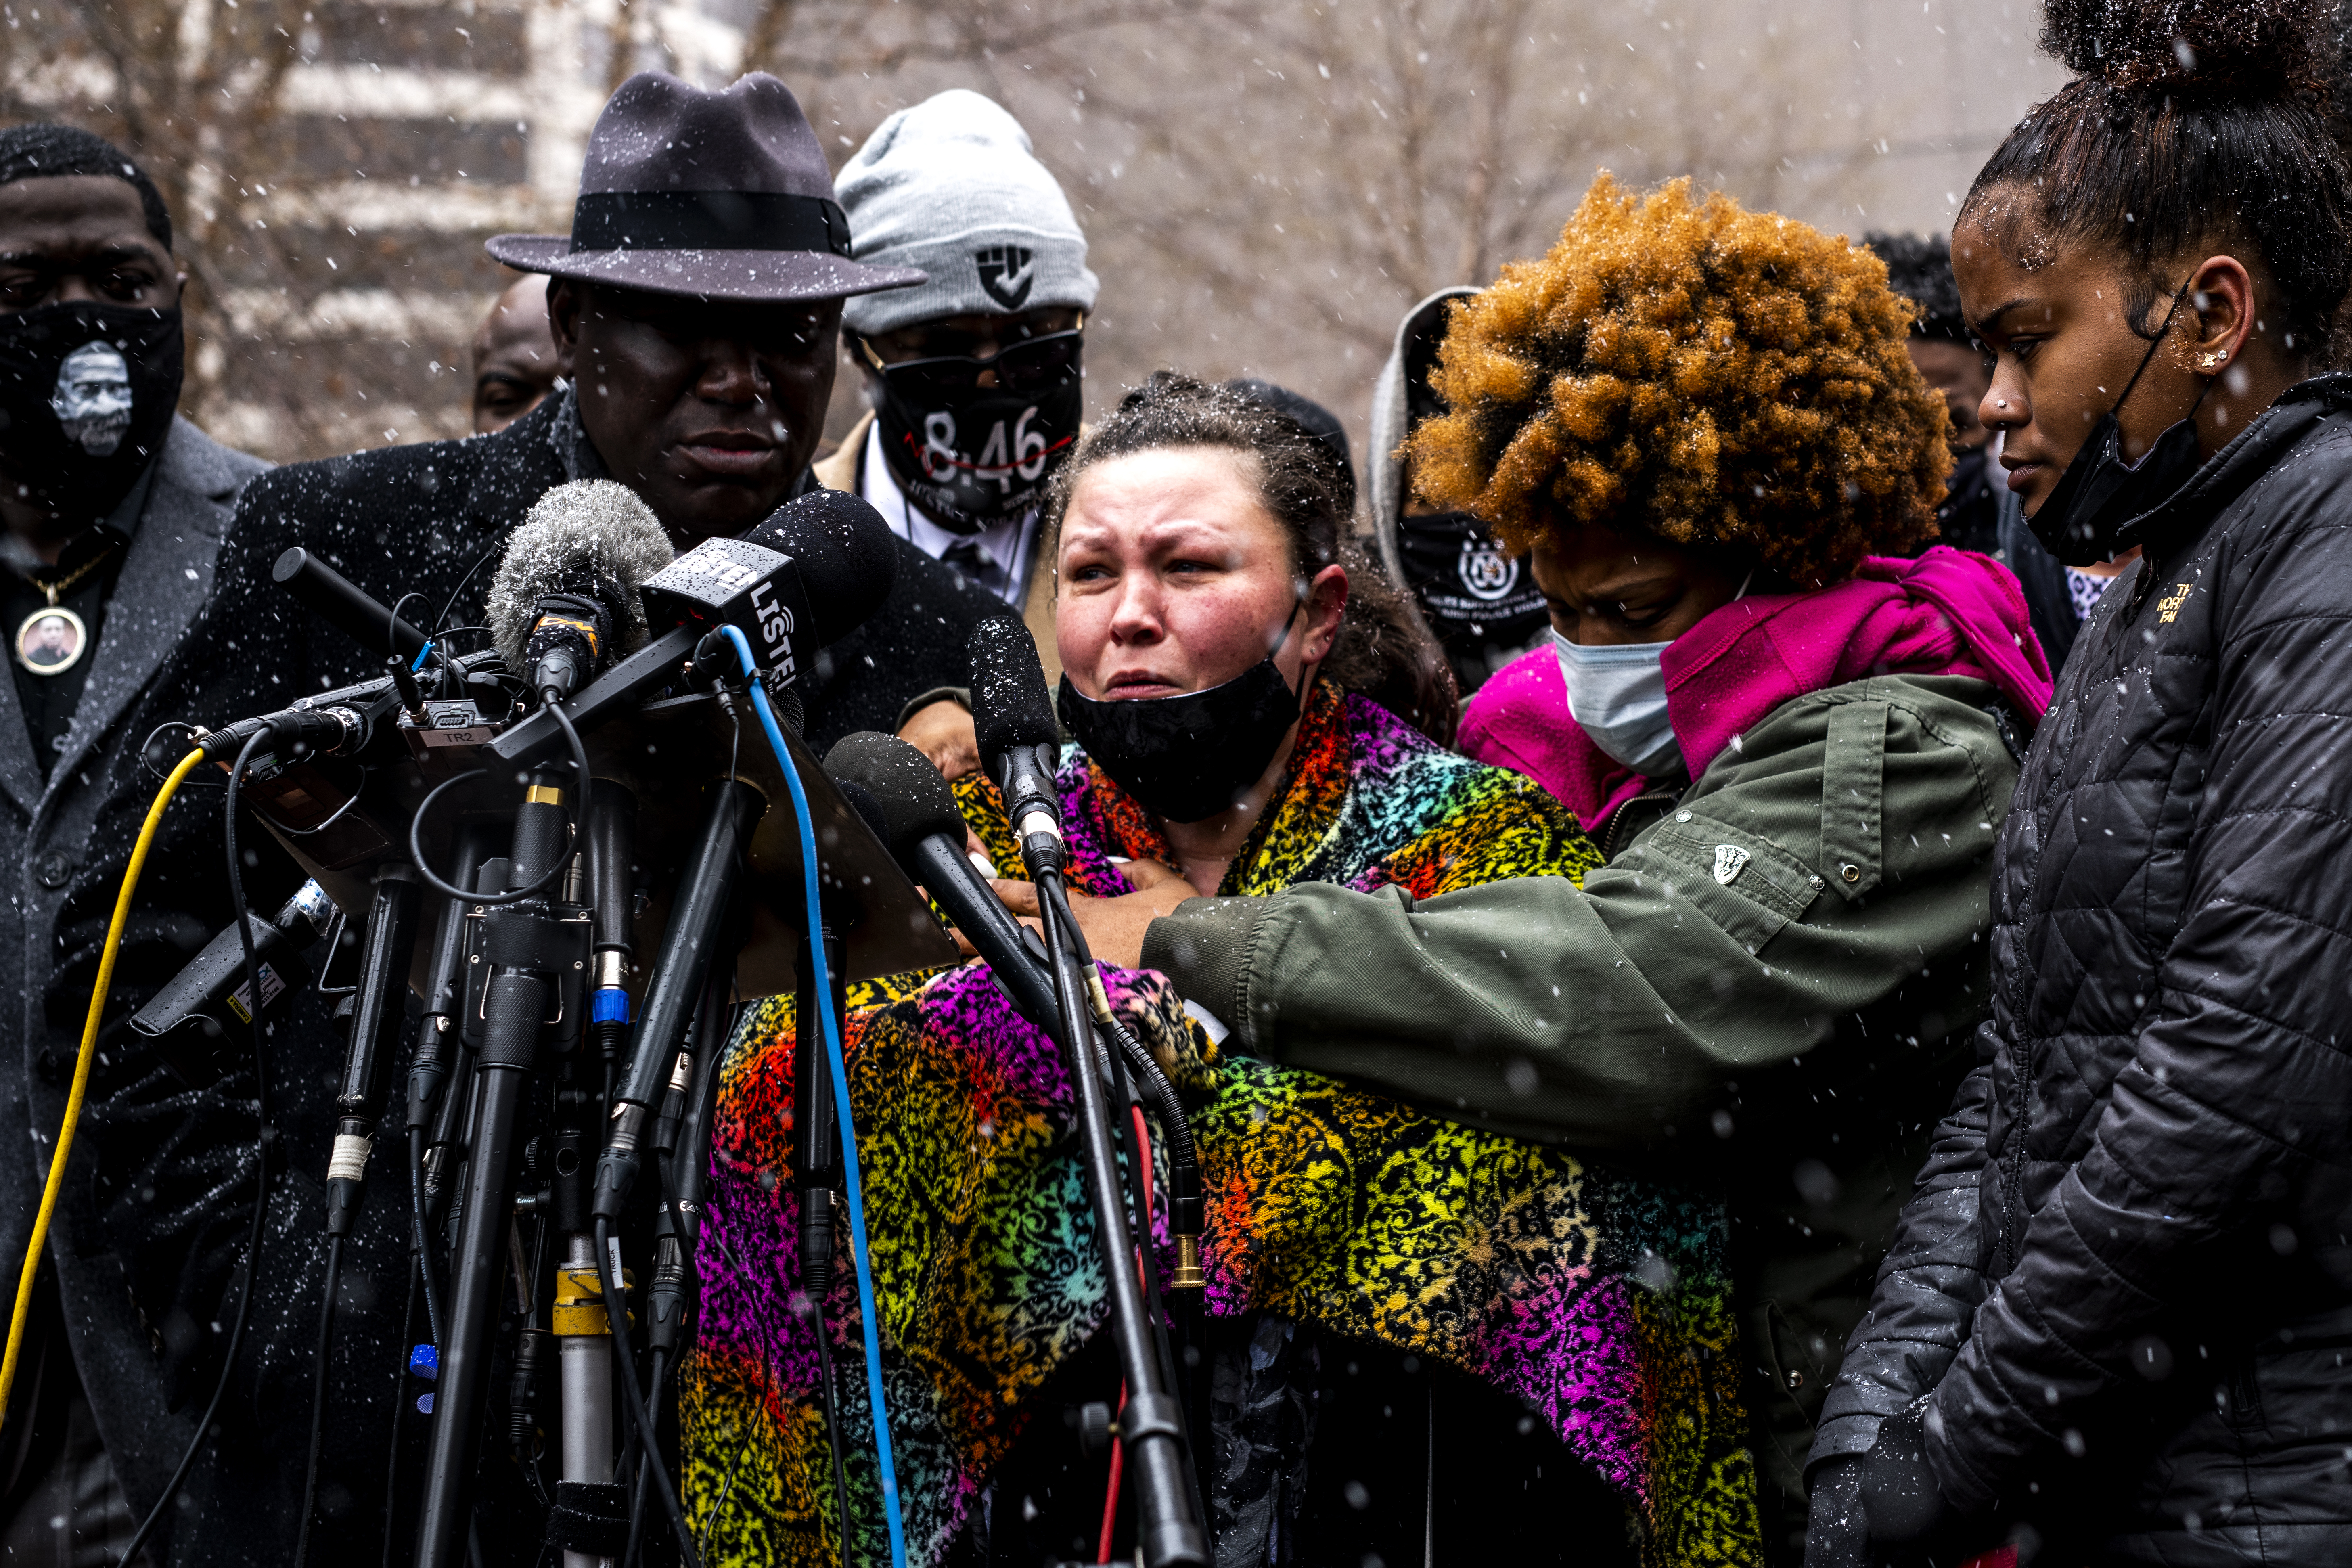 Katie Wright, mother of Daunte, broke into tears Tuesday recounting her last conversation with her son, who called her for advice after being pulled over by police. An officer shot him shortly after. CREDIT: Stephen Maturen/Getty Images